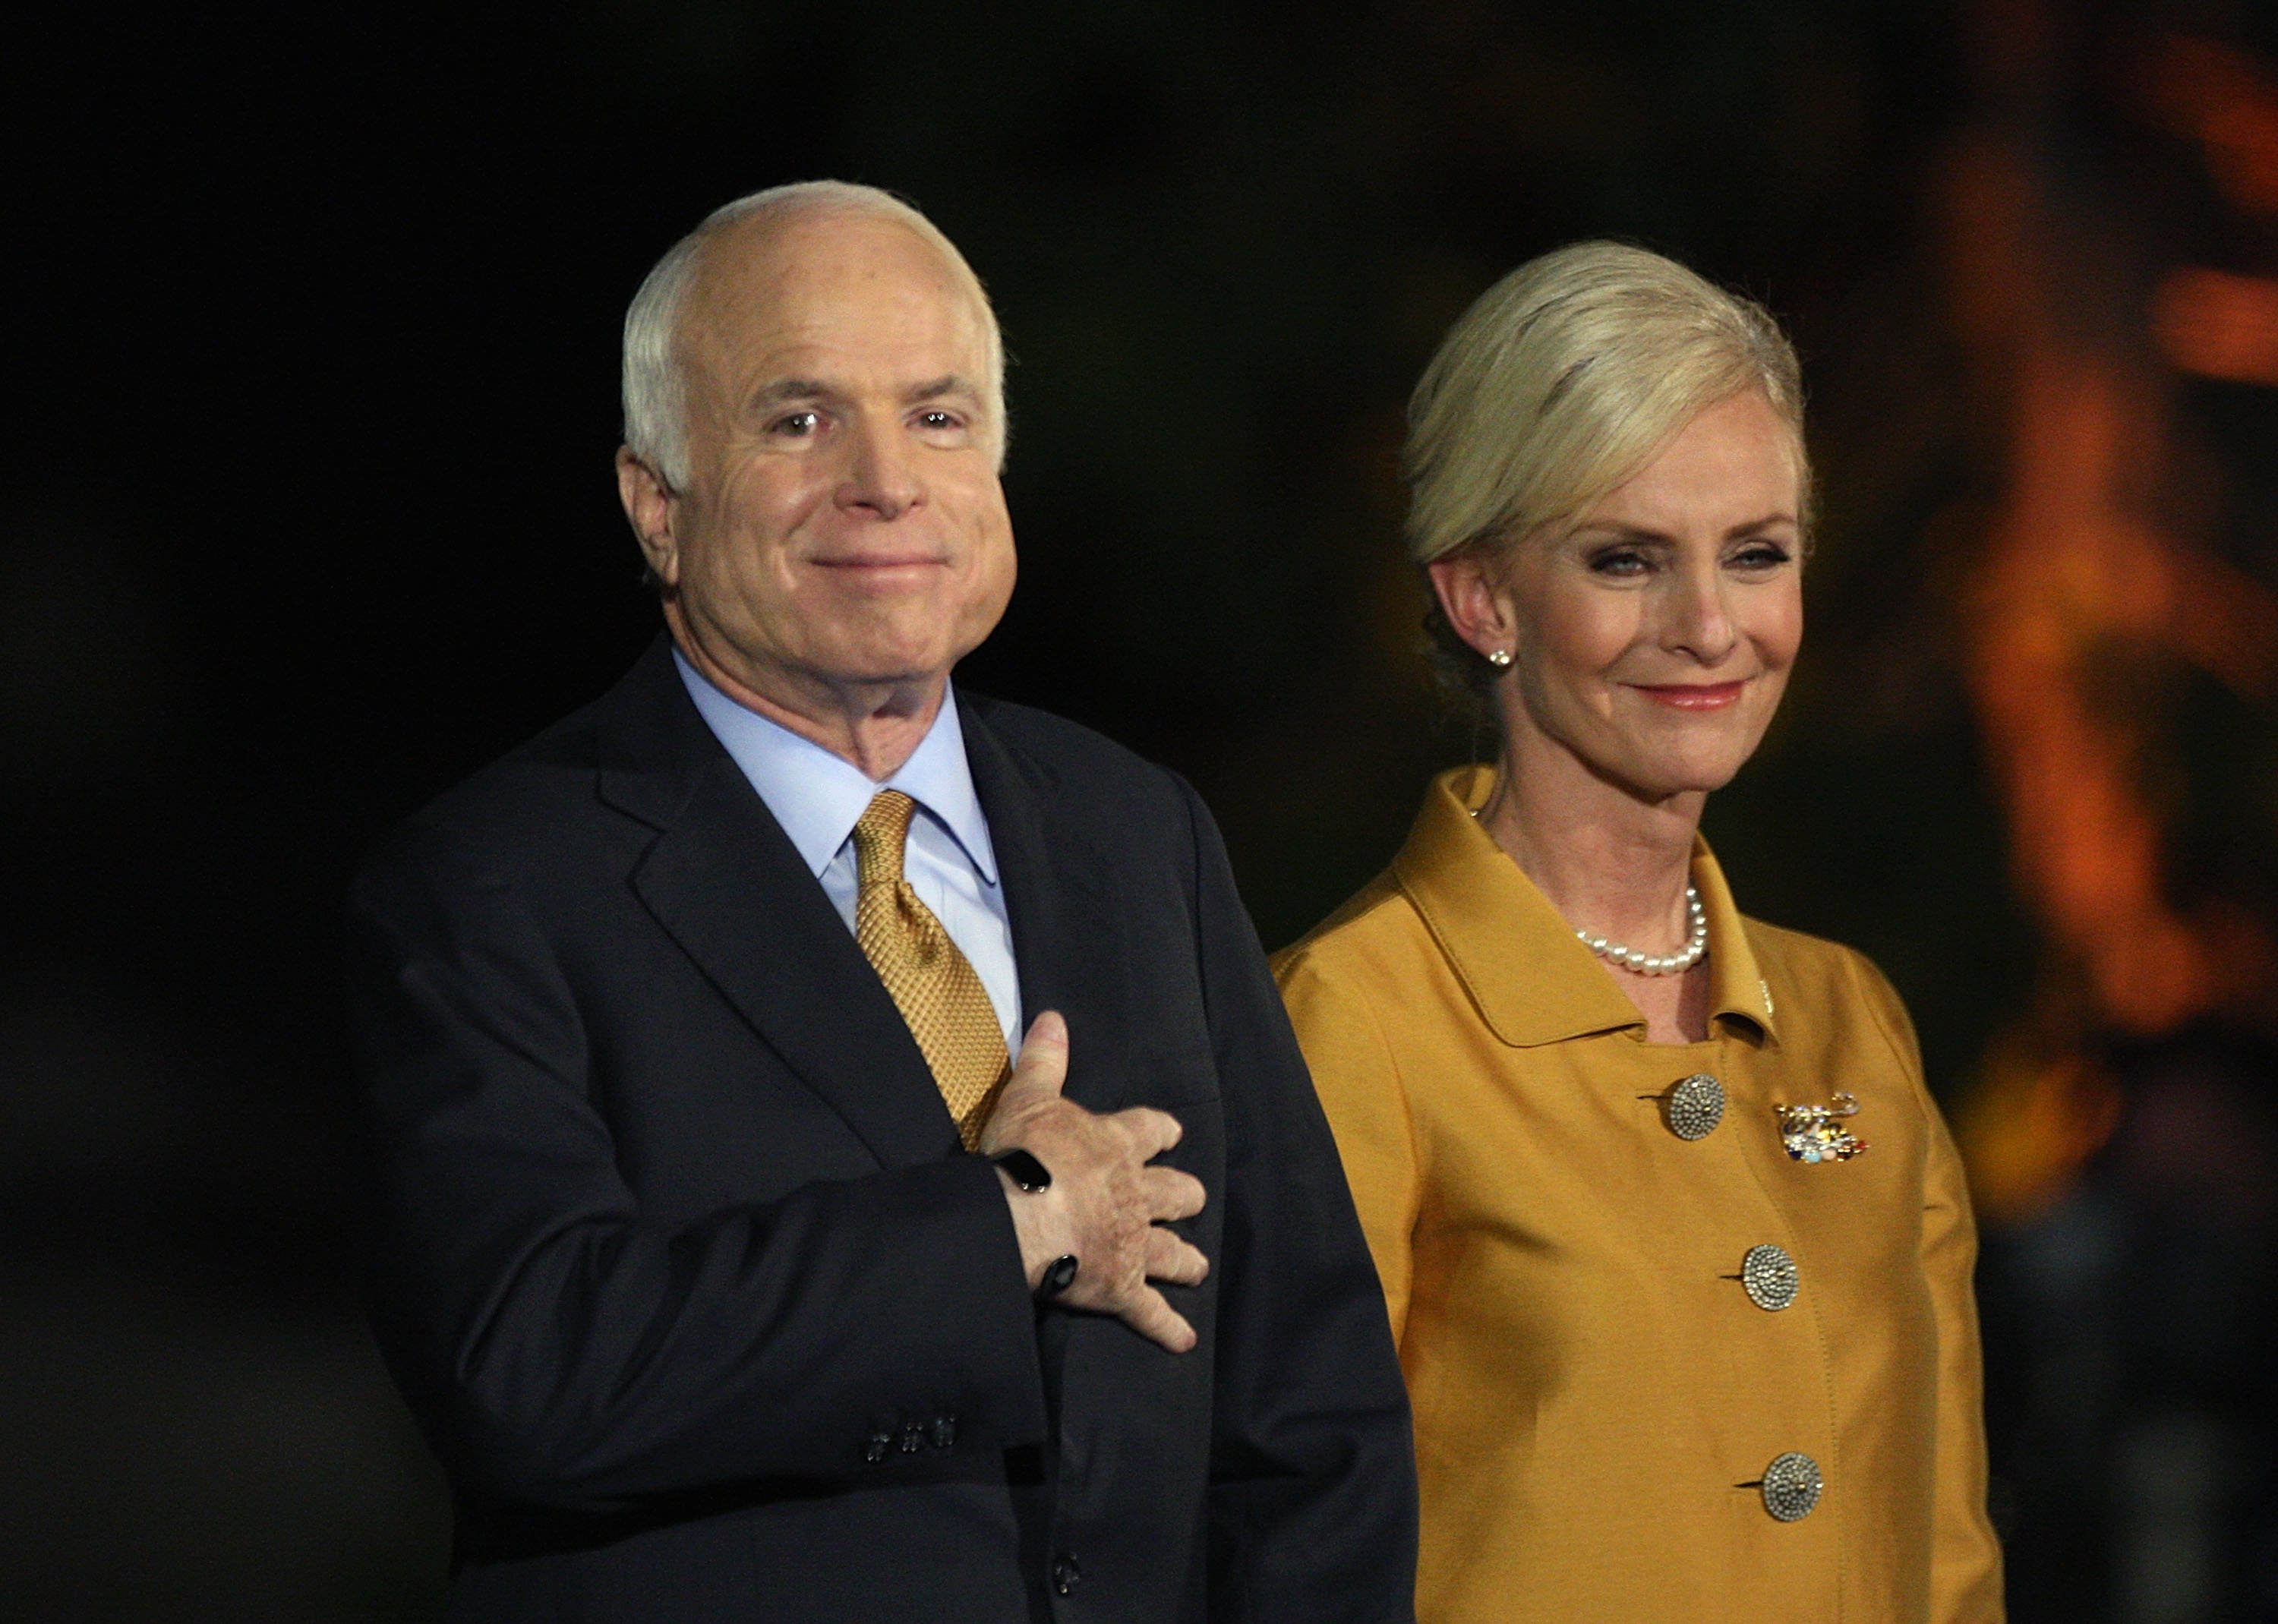 Late U.S. Sen. John McCain concedes victory on stage with his wife Cindy McCain during the election night rally in 2008. | Source: Getty Images